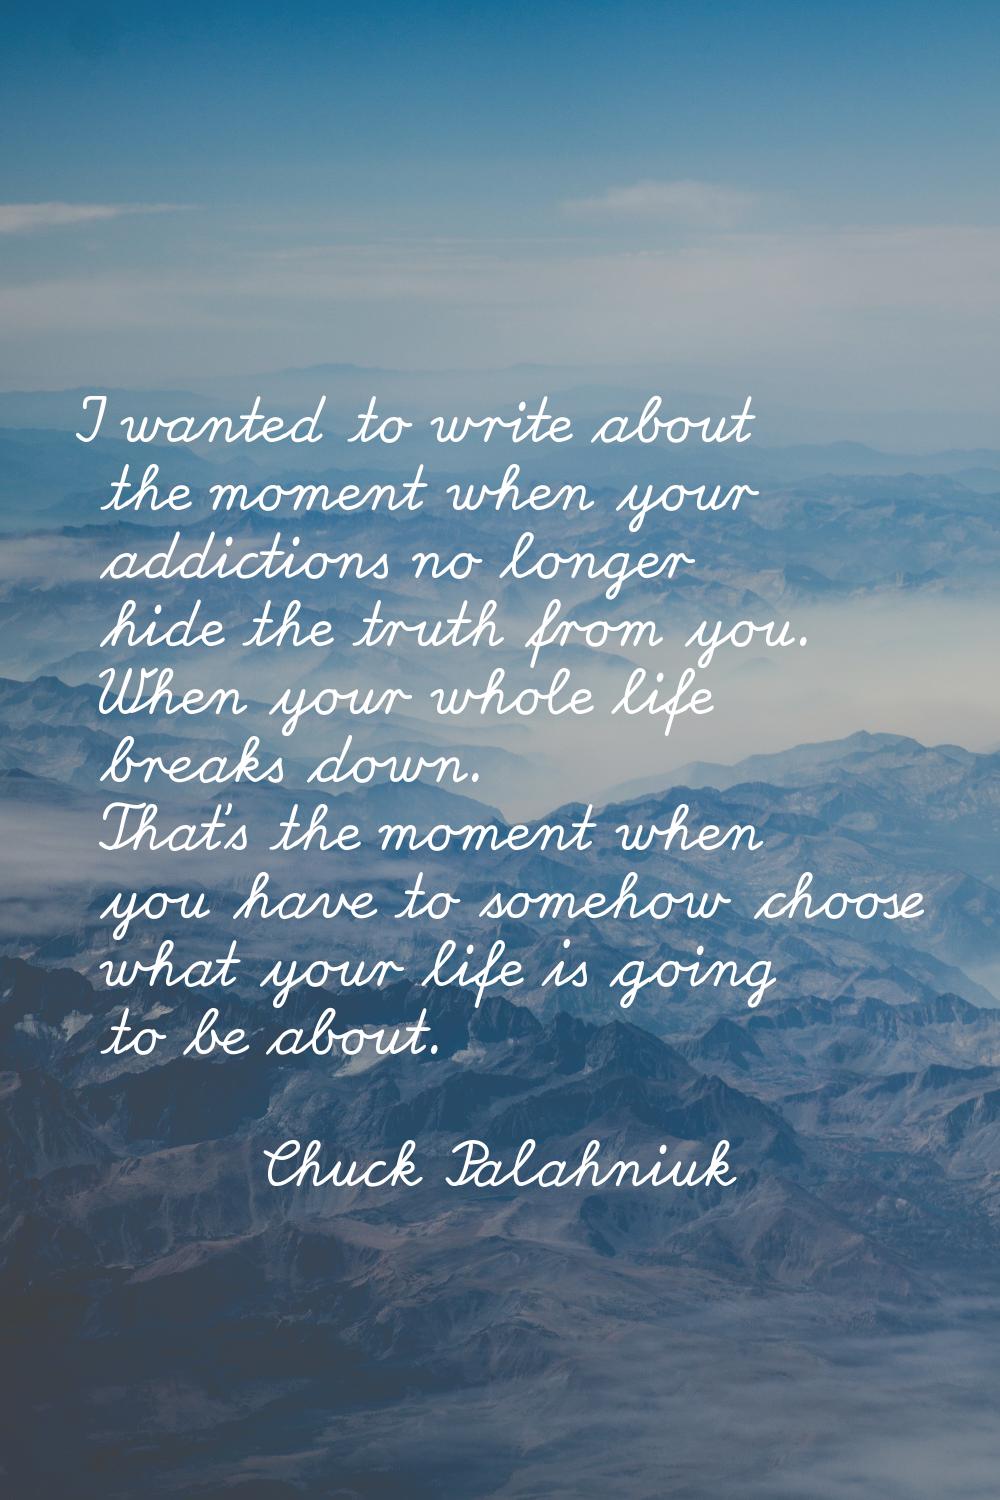 I wanted to write about the moment when your addictions no longer hide the truth from you. When you